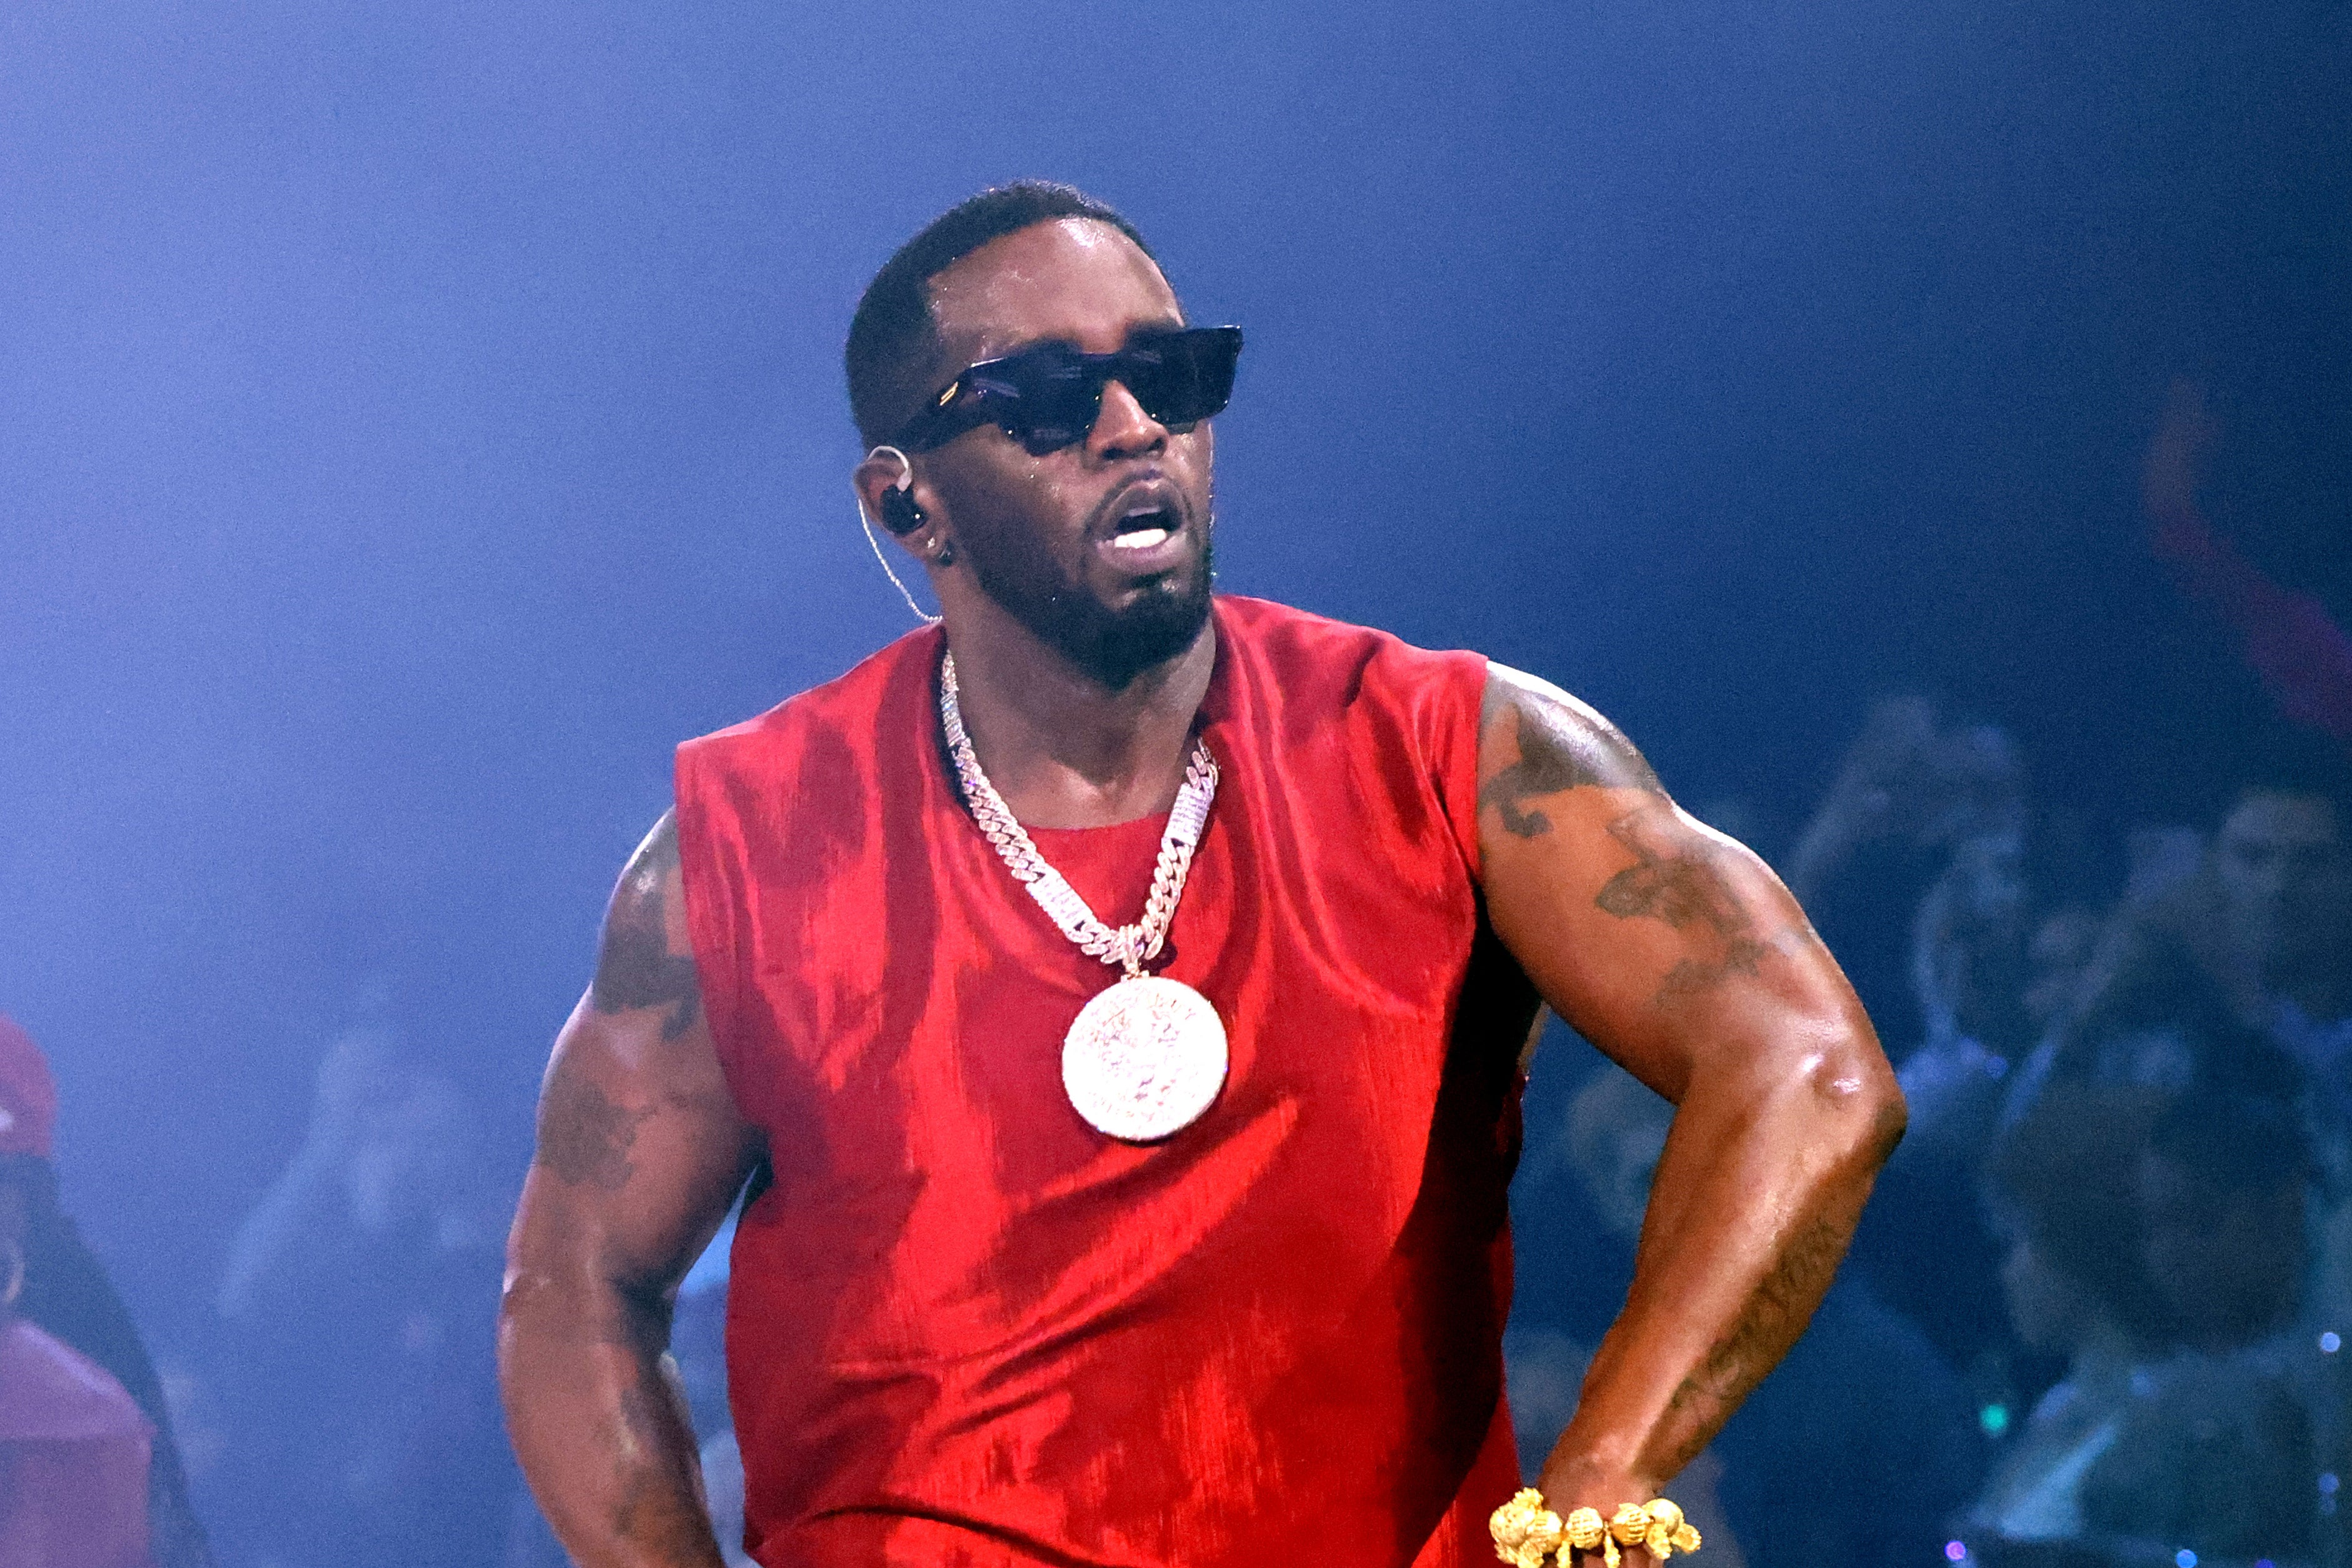 Sean ‘Diddy’ Combs has denied the allegations against him